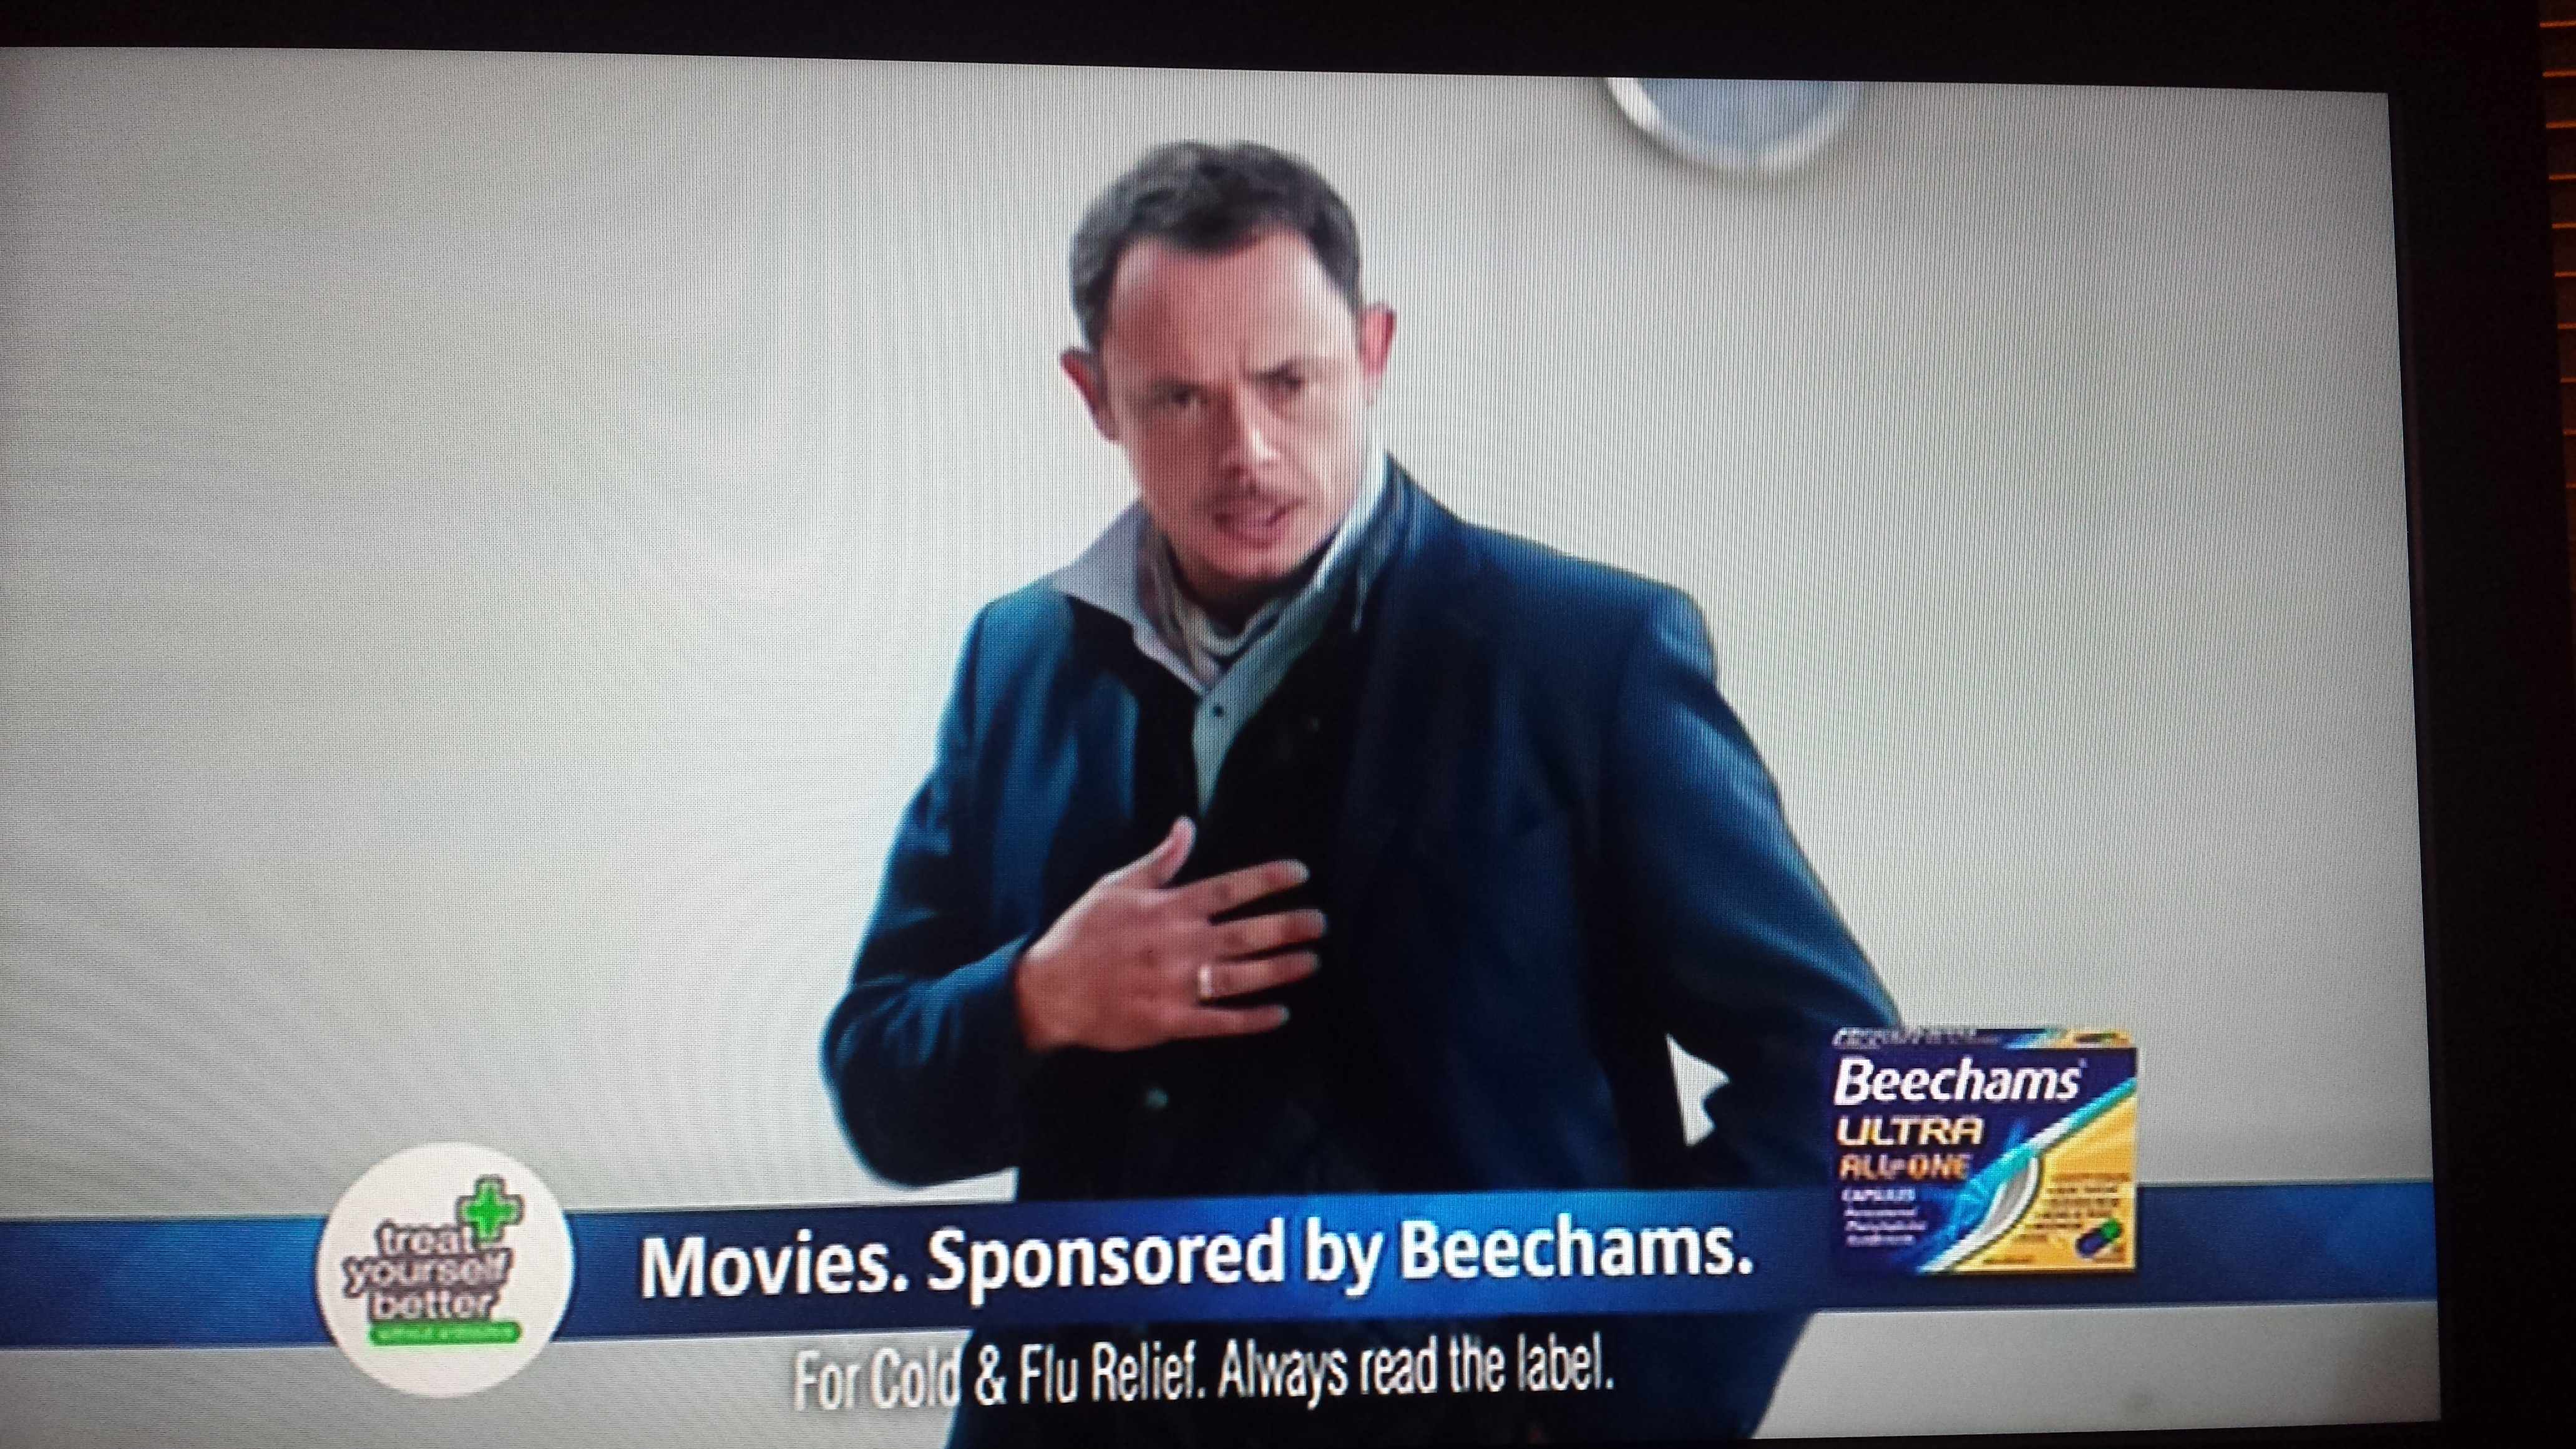 As a terrible auditionee for Channel 5 prime time movies sponsored by Beechams.